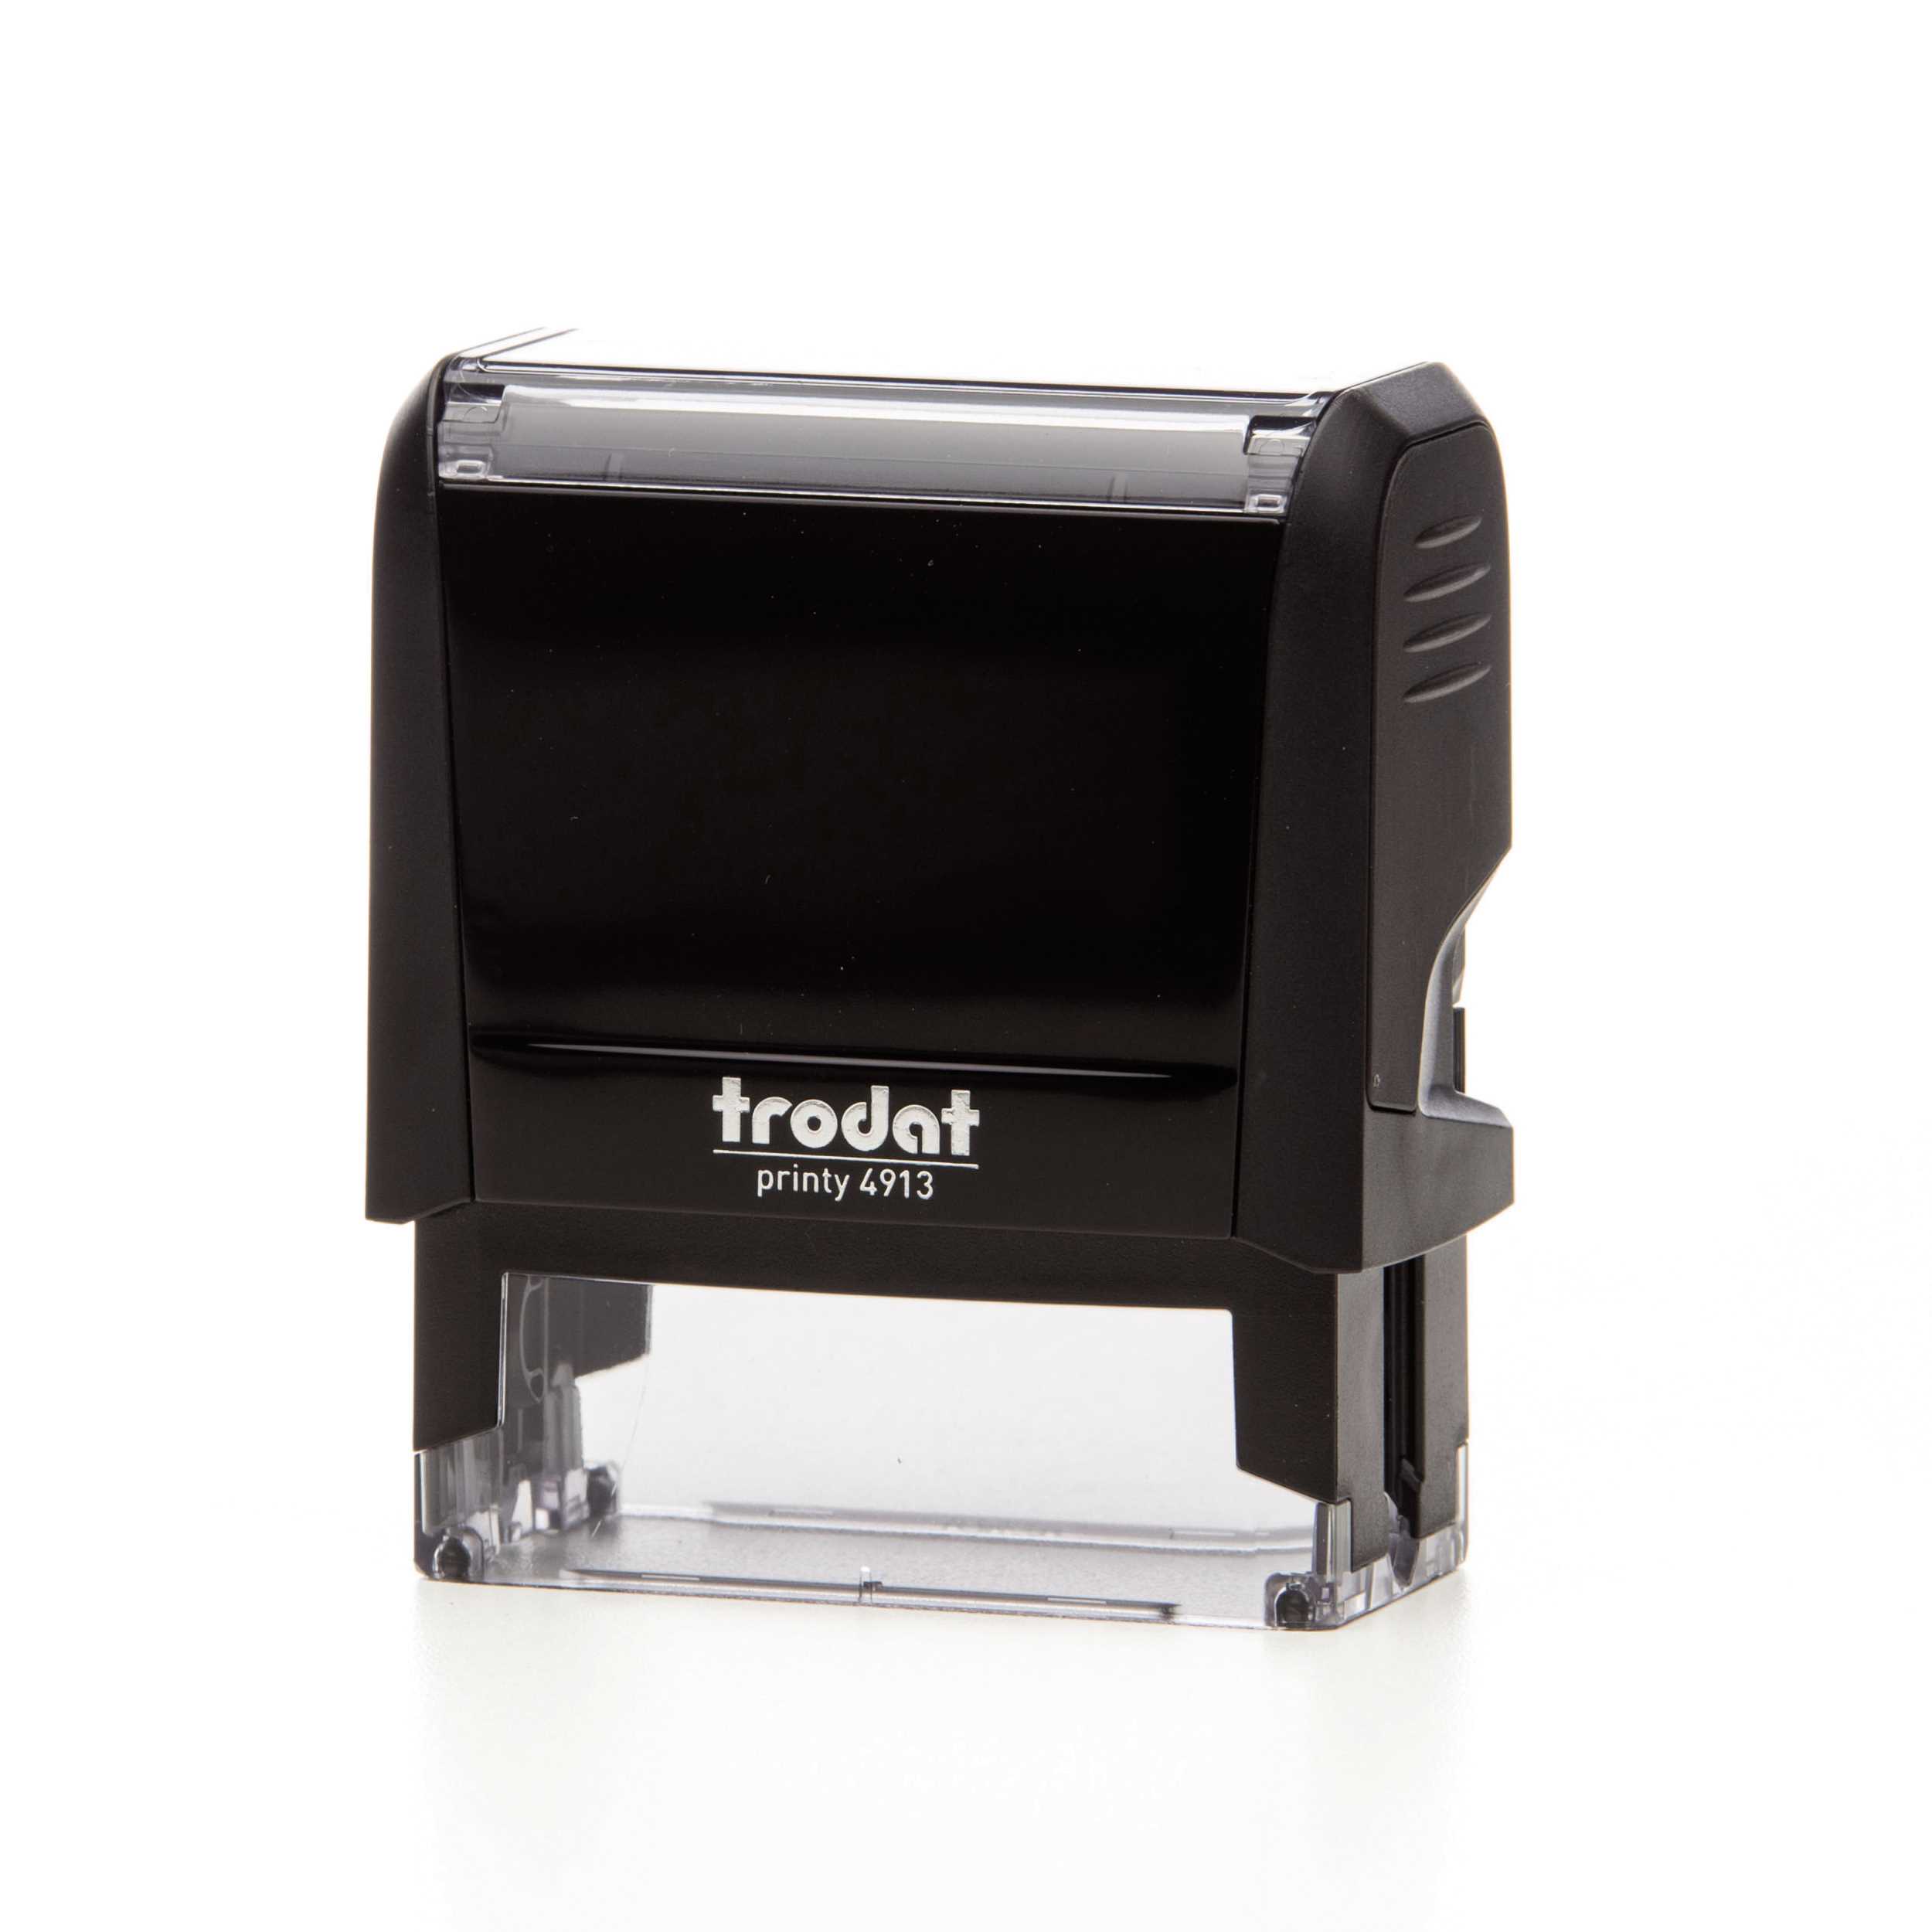 P40 - Custom Self Inking Stamp - Max. 5 lines of text.